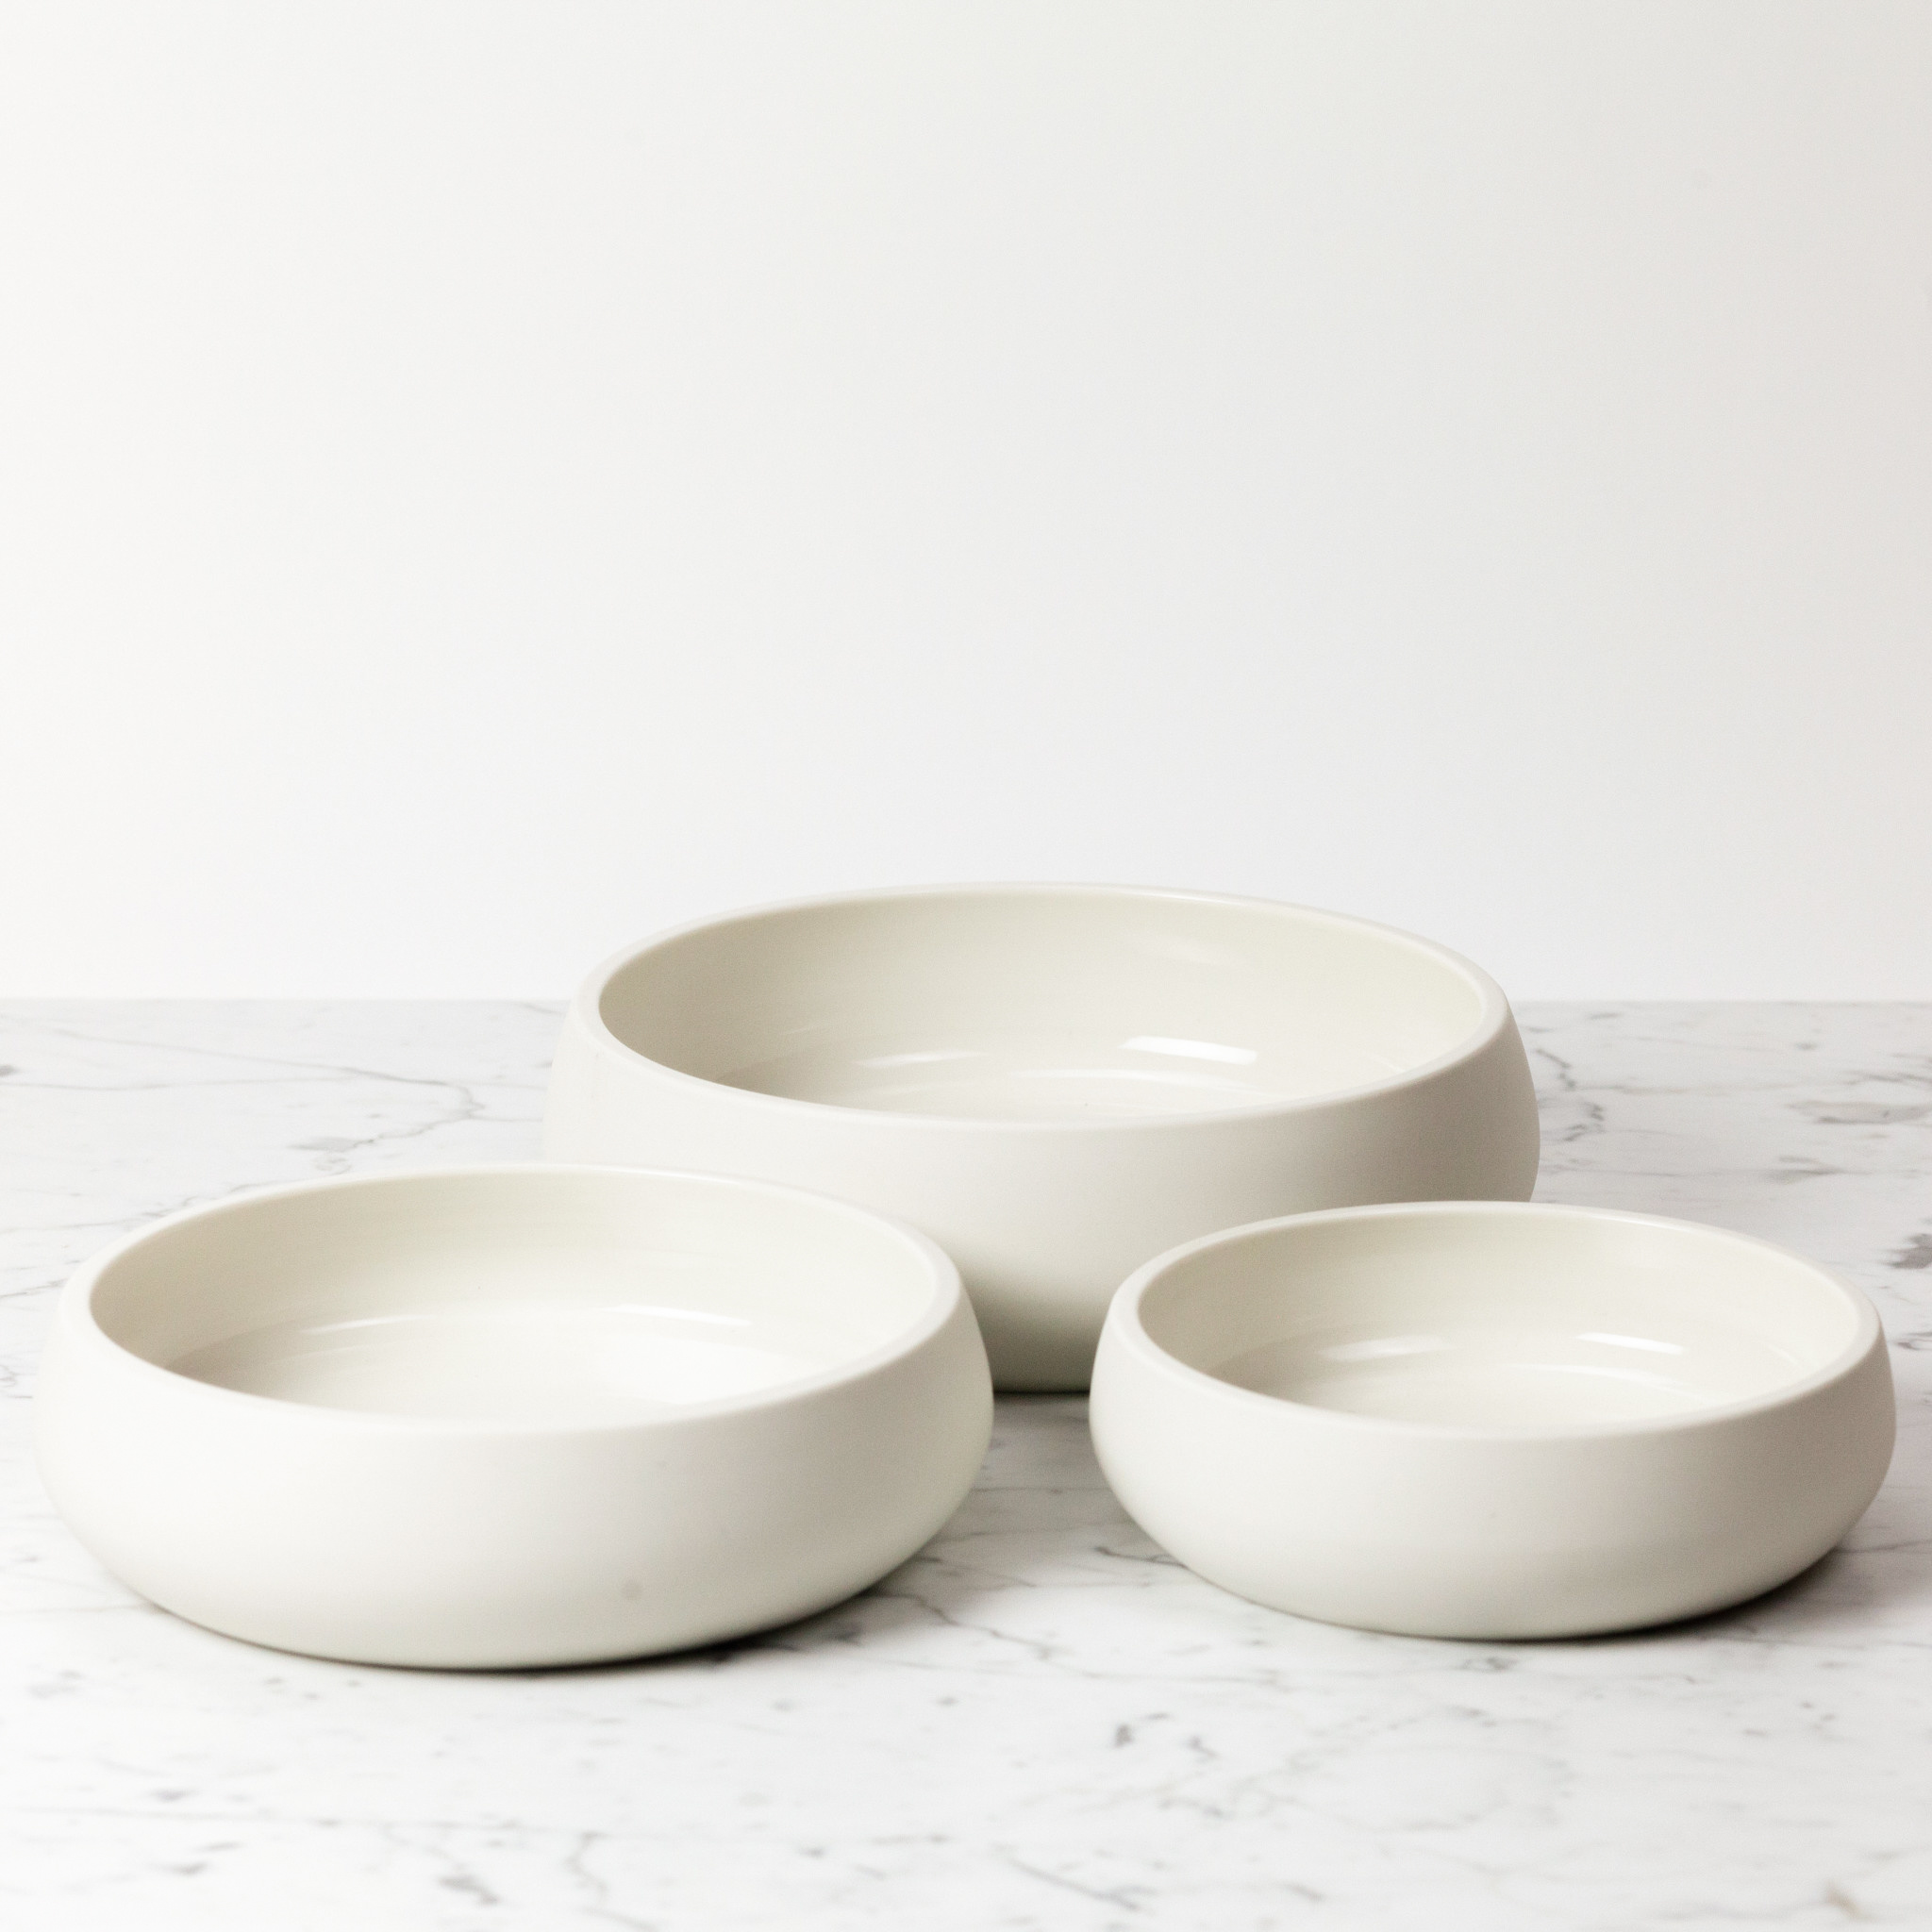 3pc Plastic Nesting Serving Bowls White - Made By Design™